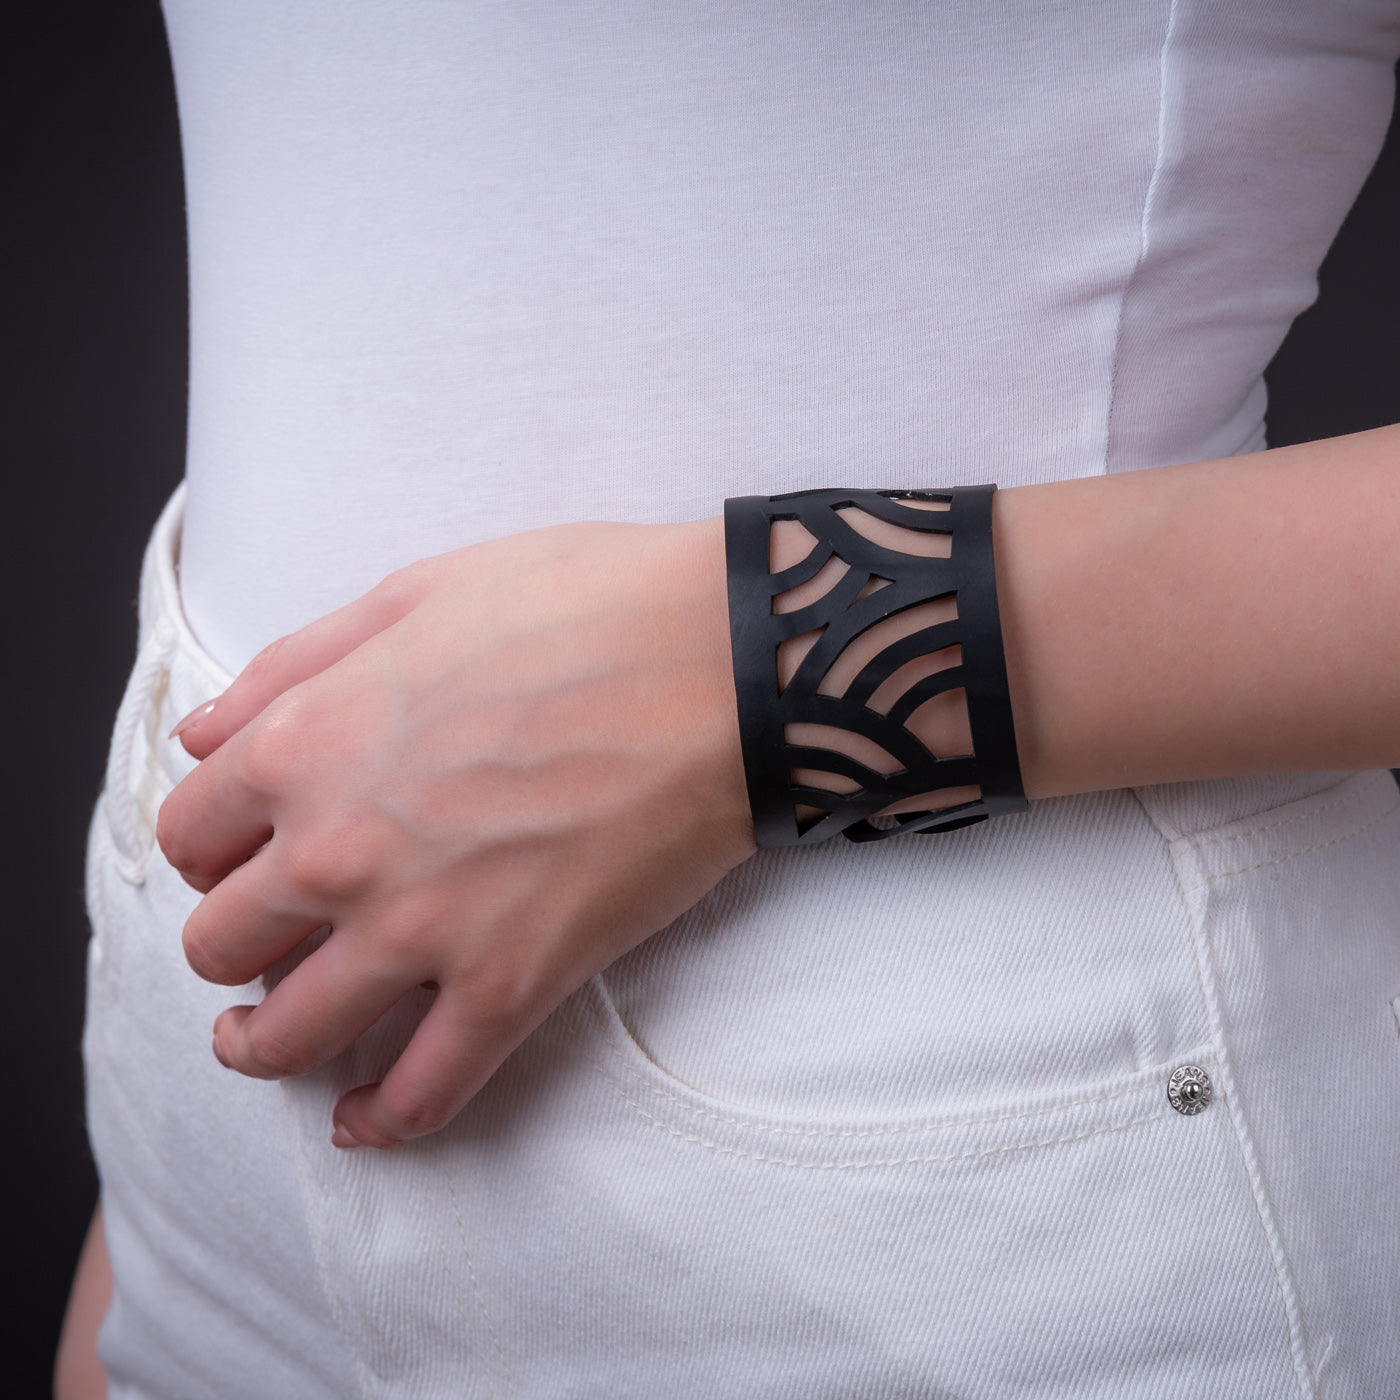 Seraphine (I) Recycled Rubber Bracelet by Paguro Upcycle